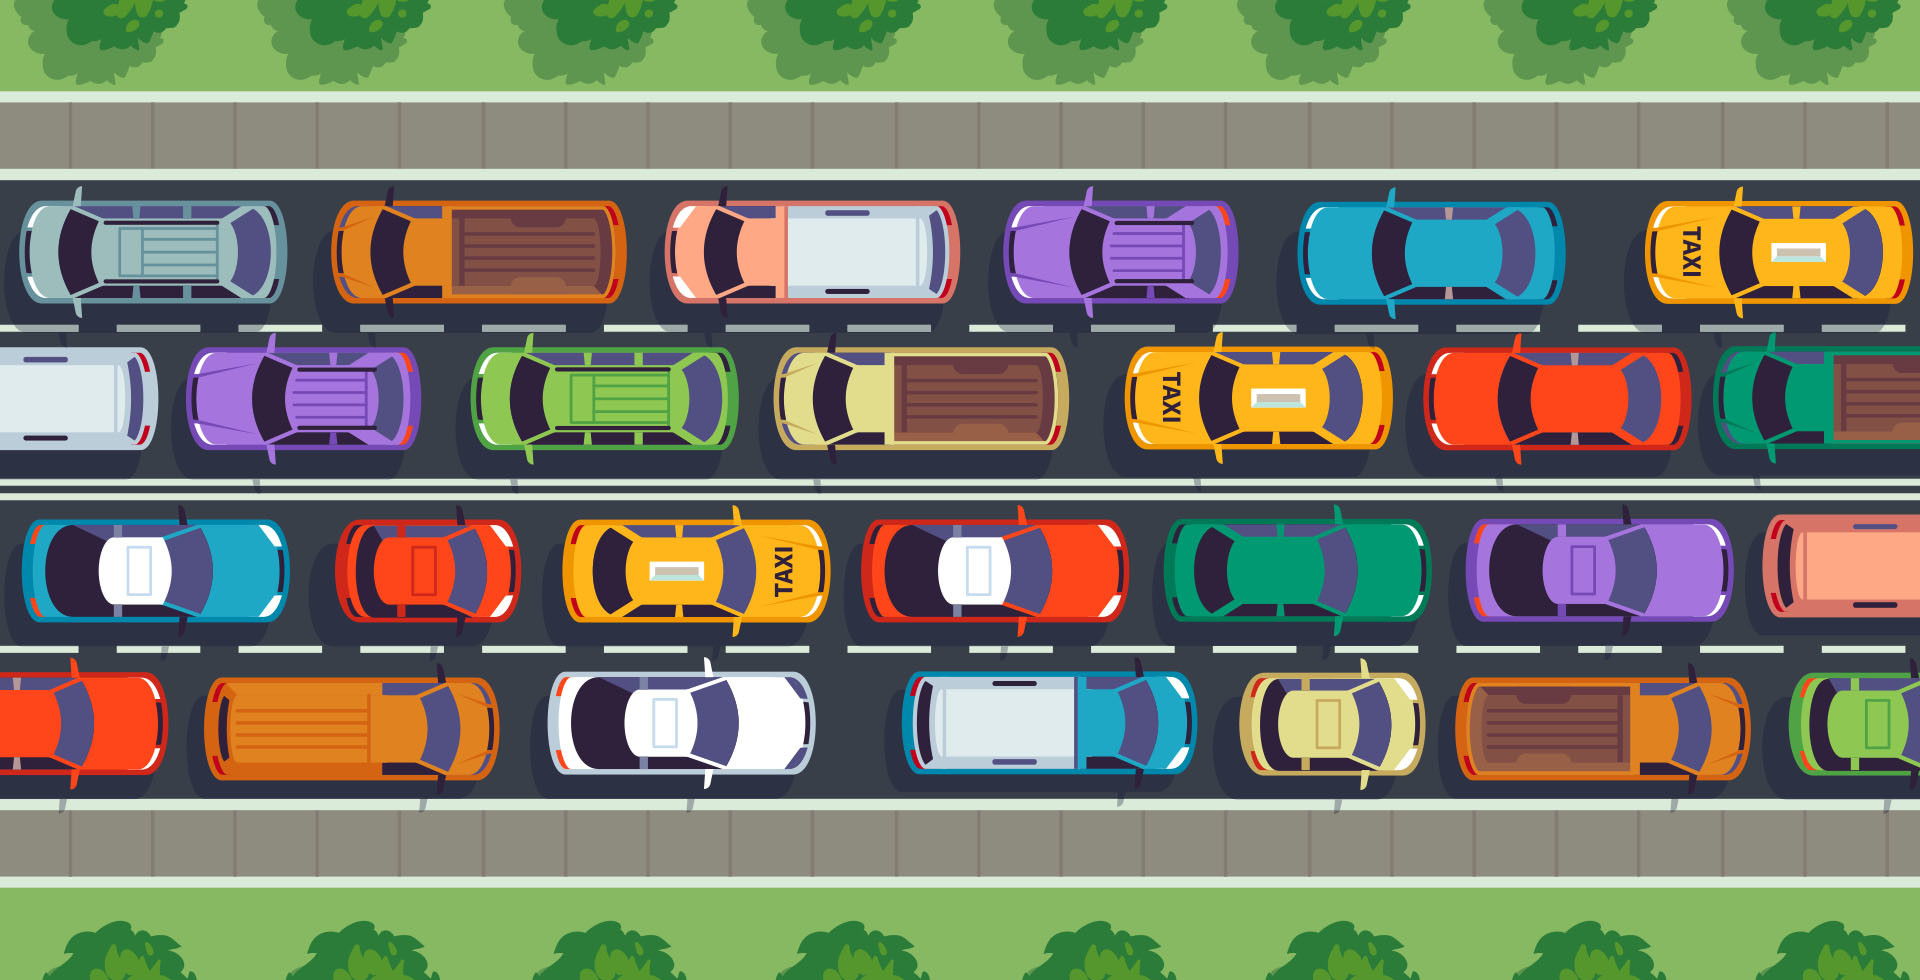 The autonomous car trap in terms of eliminating traffic jams